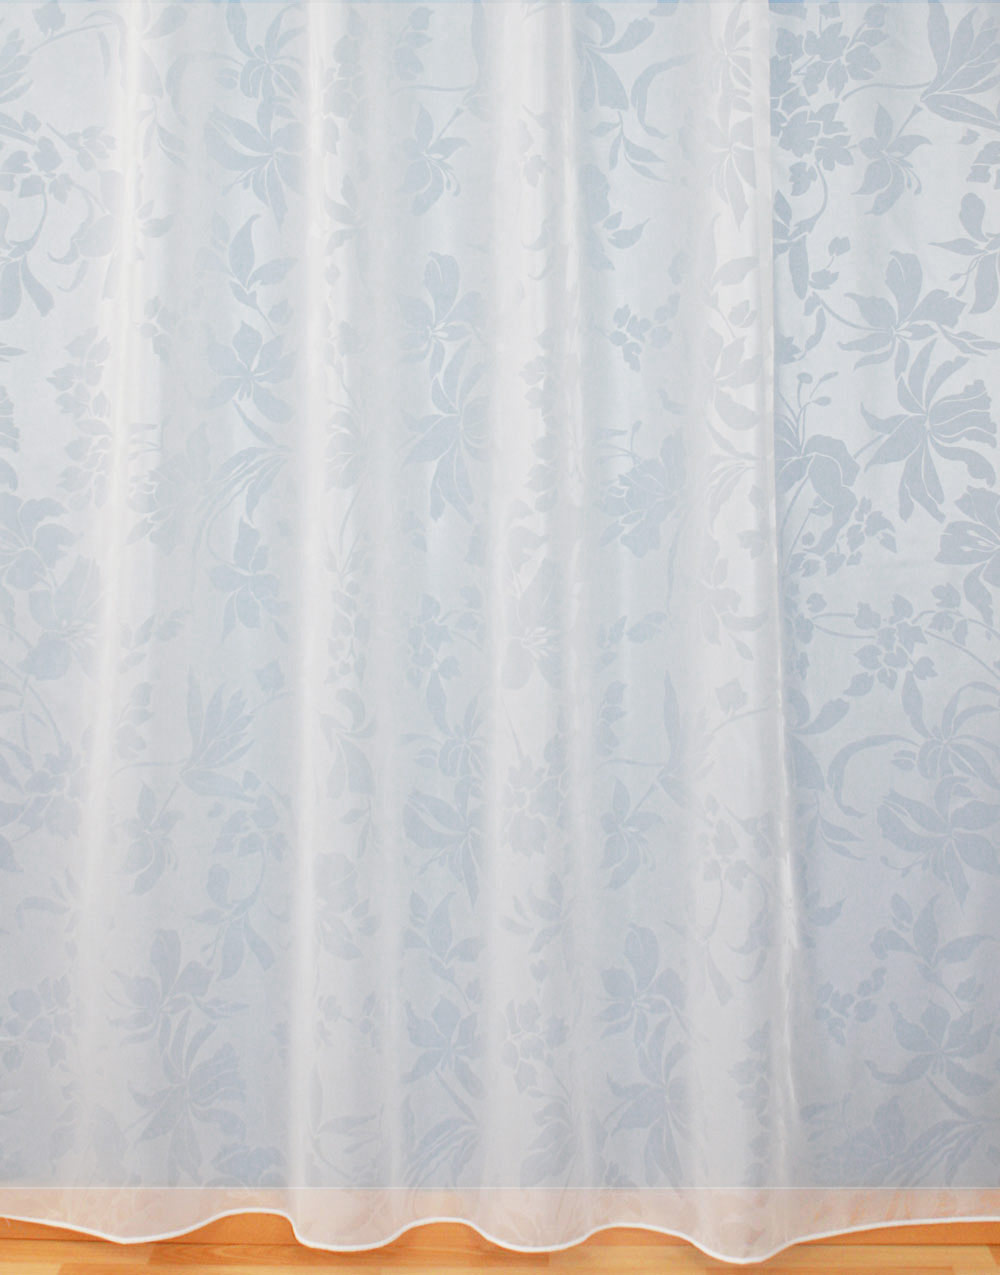 Sheer curtain with white pattern